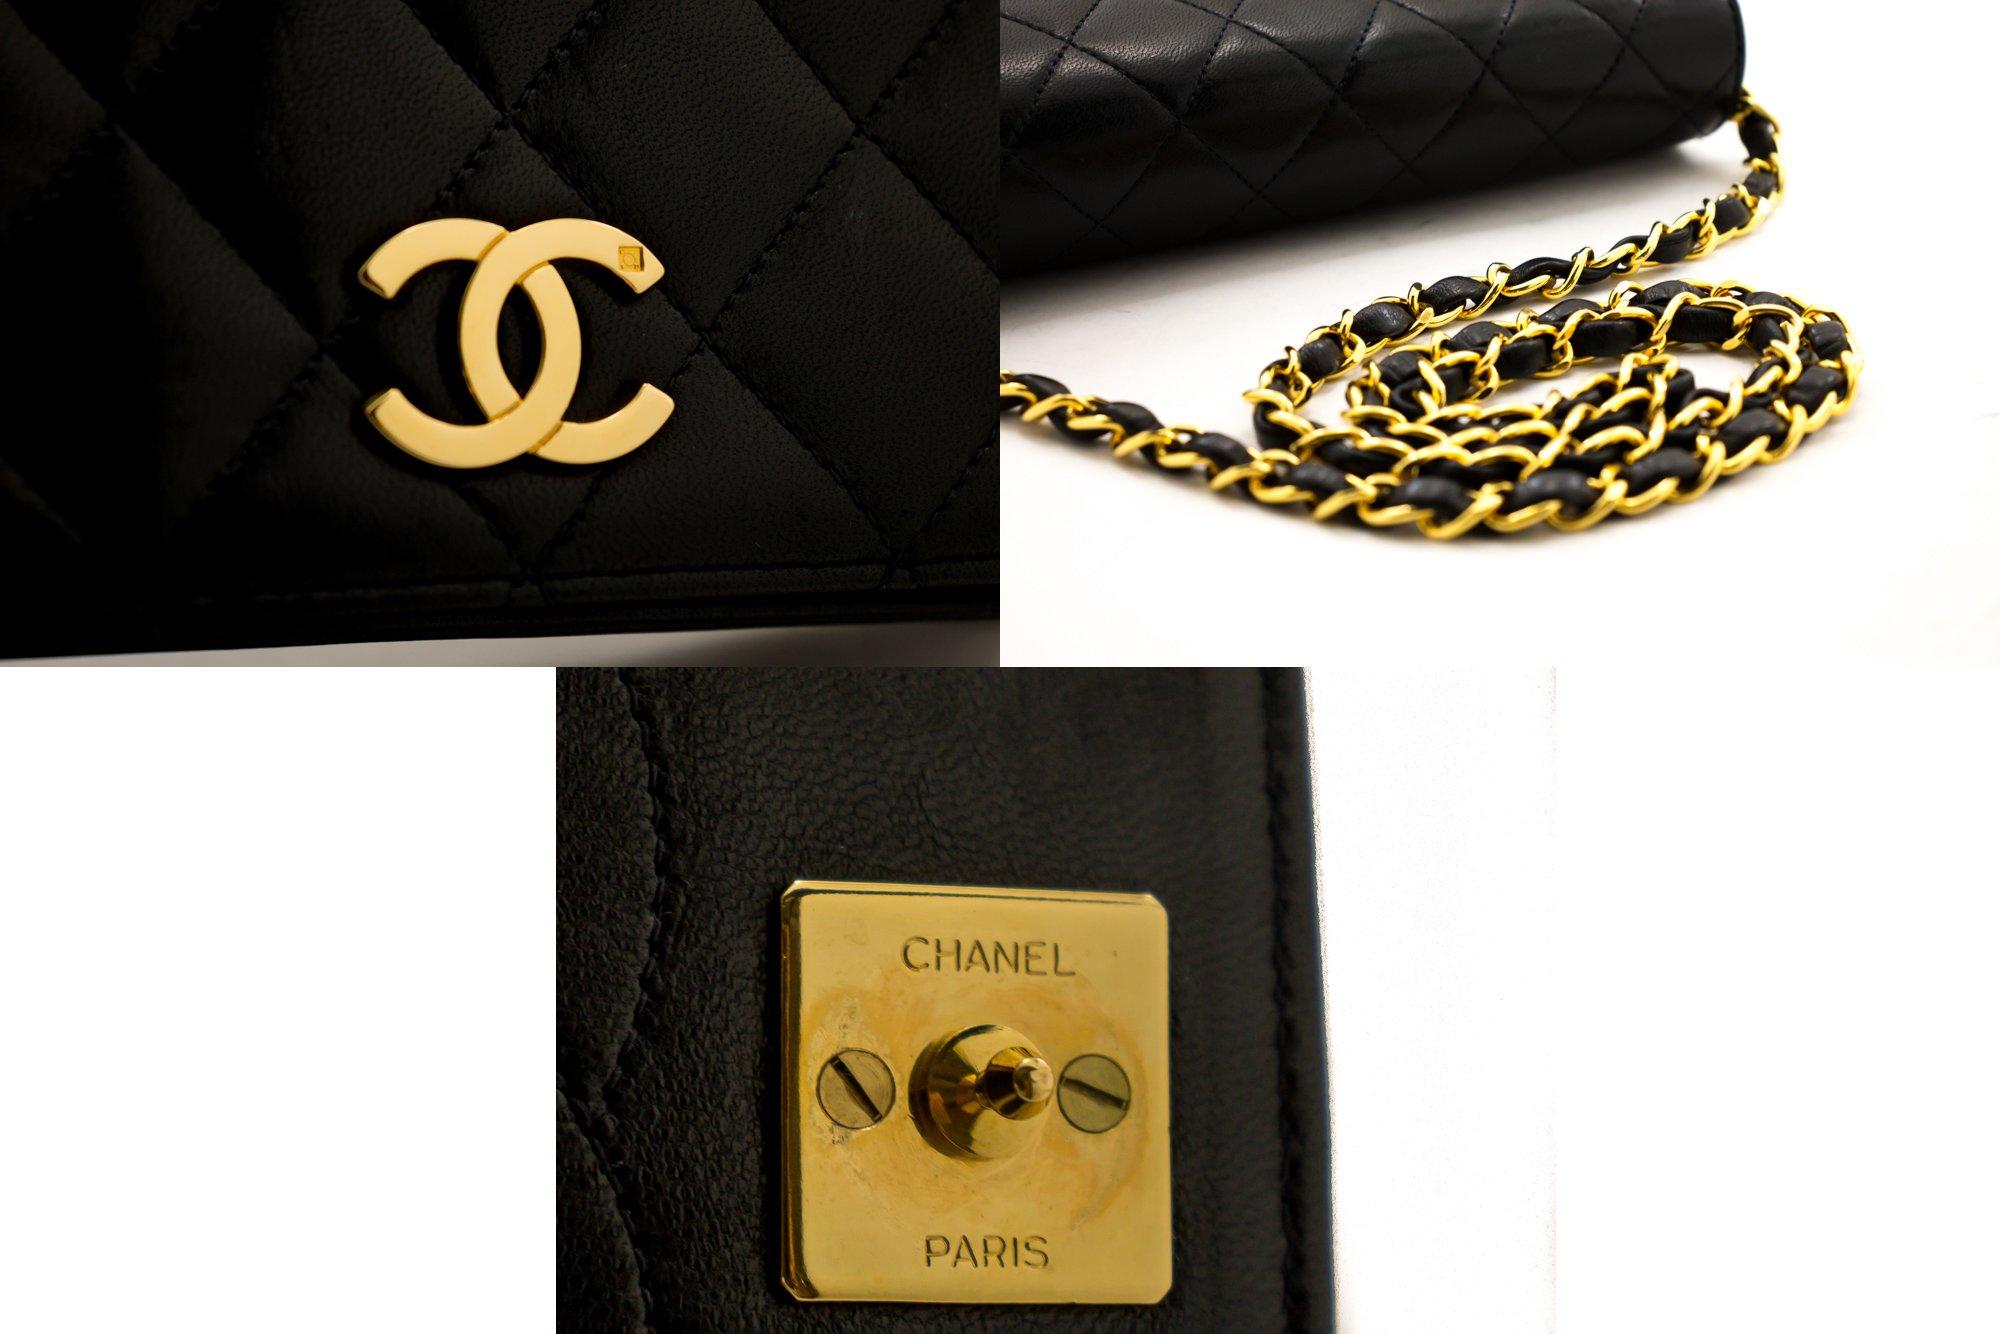 CHANEL Full Chain Flap Shoulder Bag Black Clutch Quilted Lambskin 3